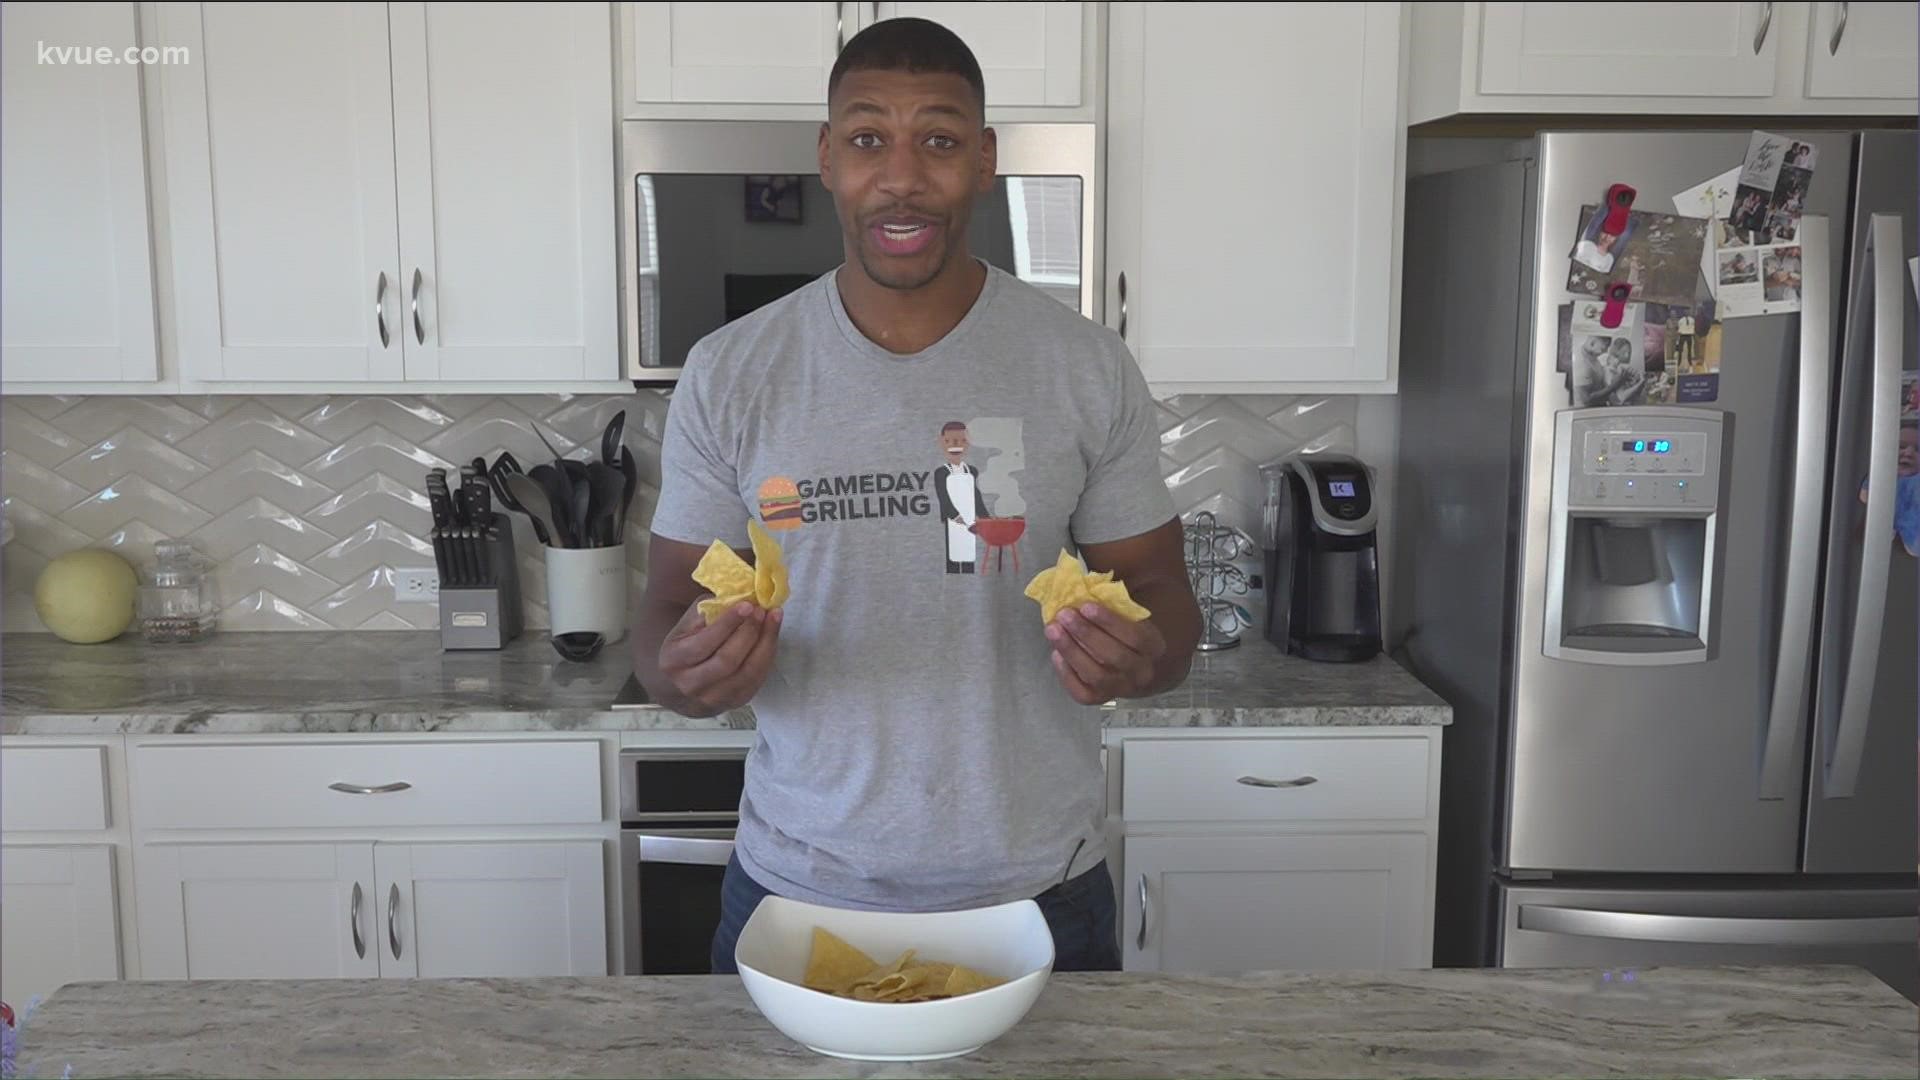 KVUE's Jeff Jones shares a recipe you have got to try for your Super Bowl watch party.